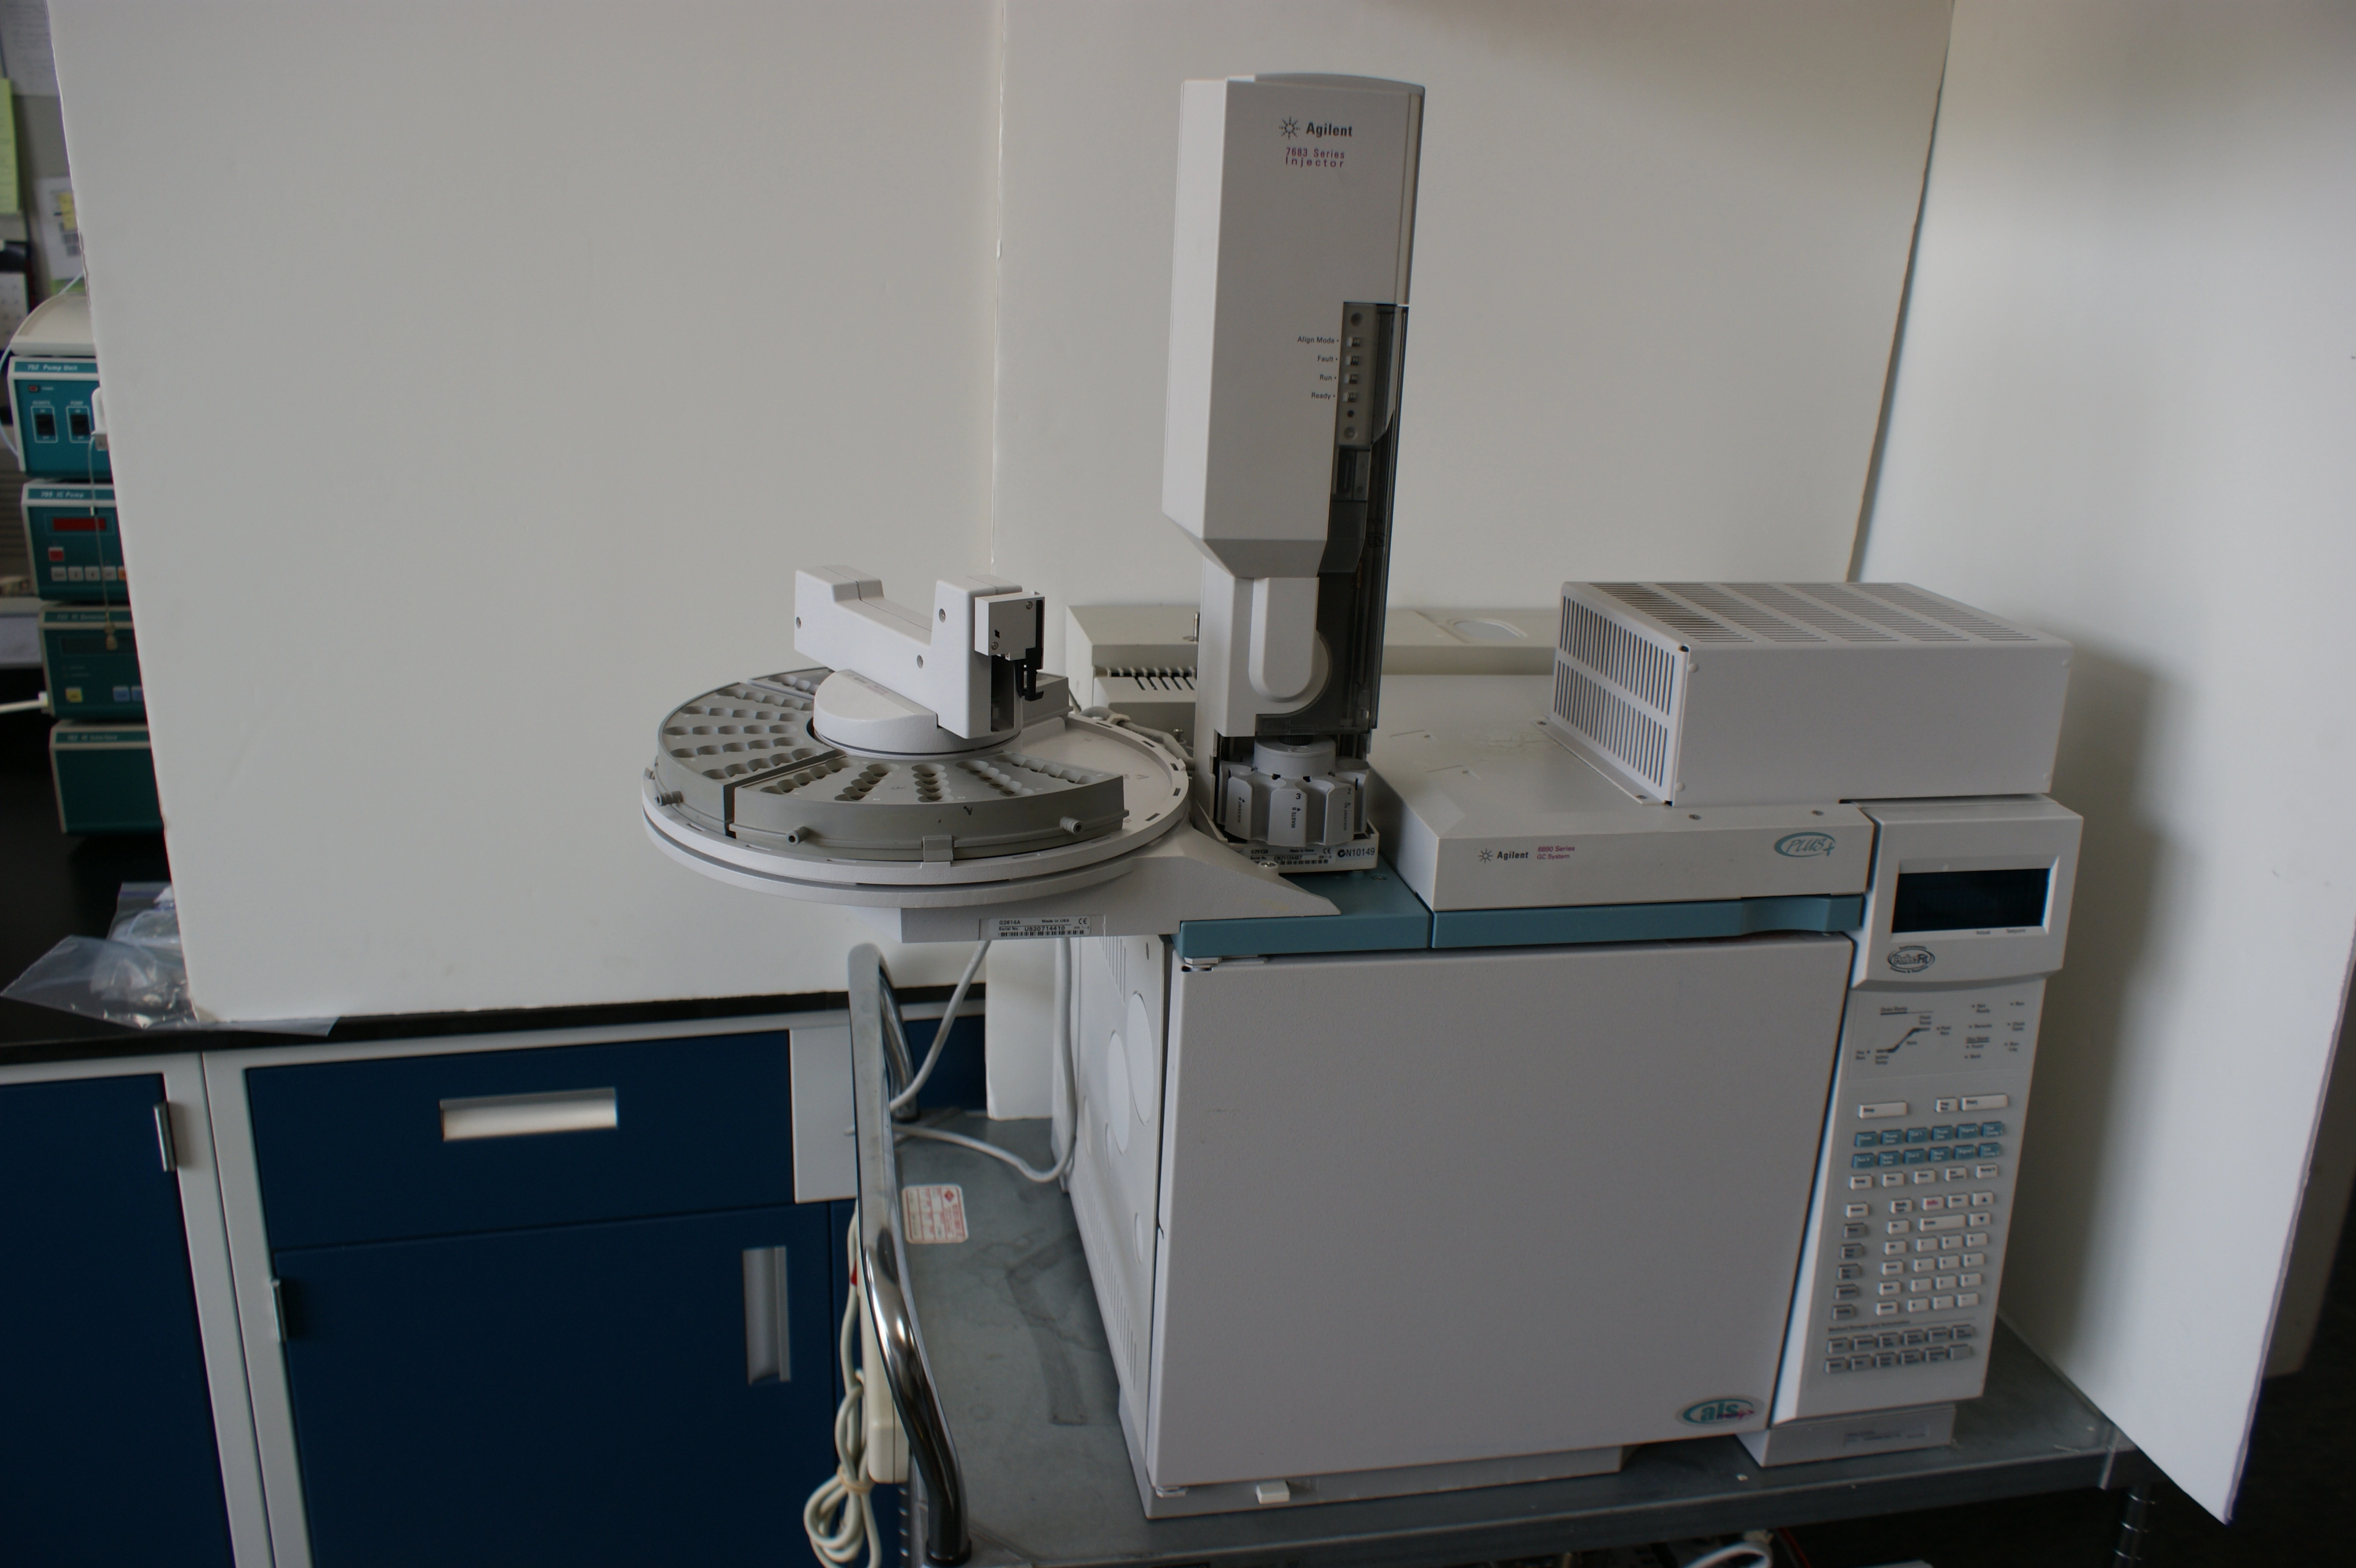 Agilent 6890 Plus Gas Chromatograph with Agilent 7683 Series Autosampler, DUAL FPD Detectors,  Computer with Chemstaion Softw